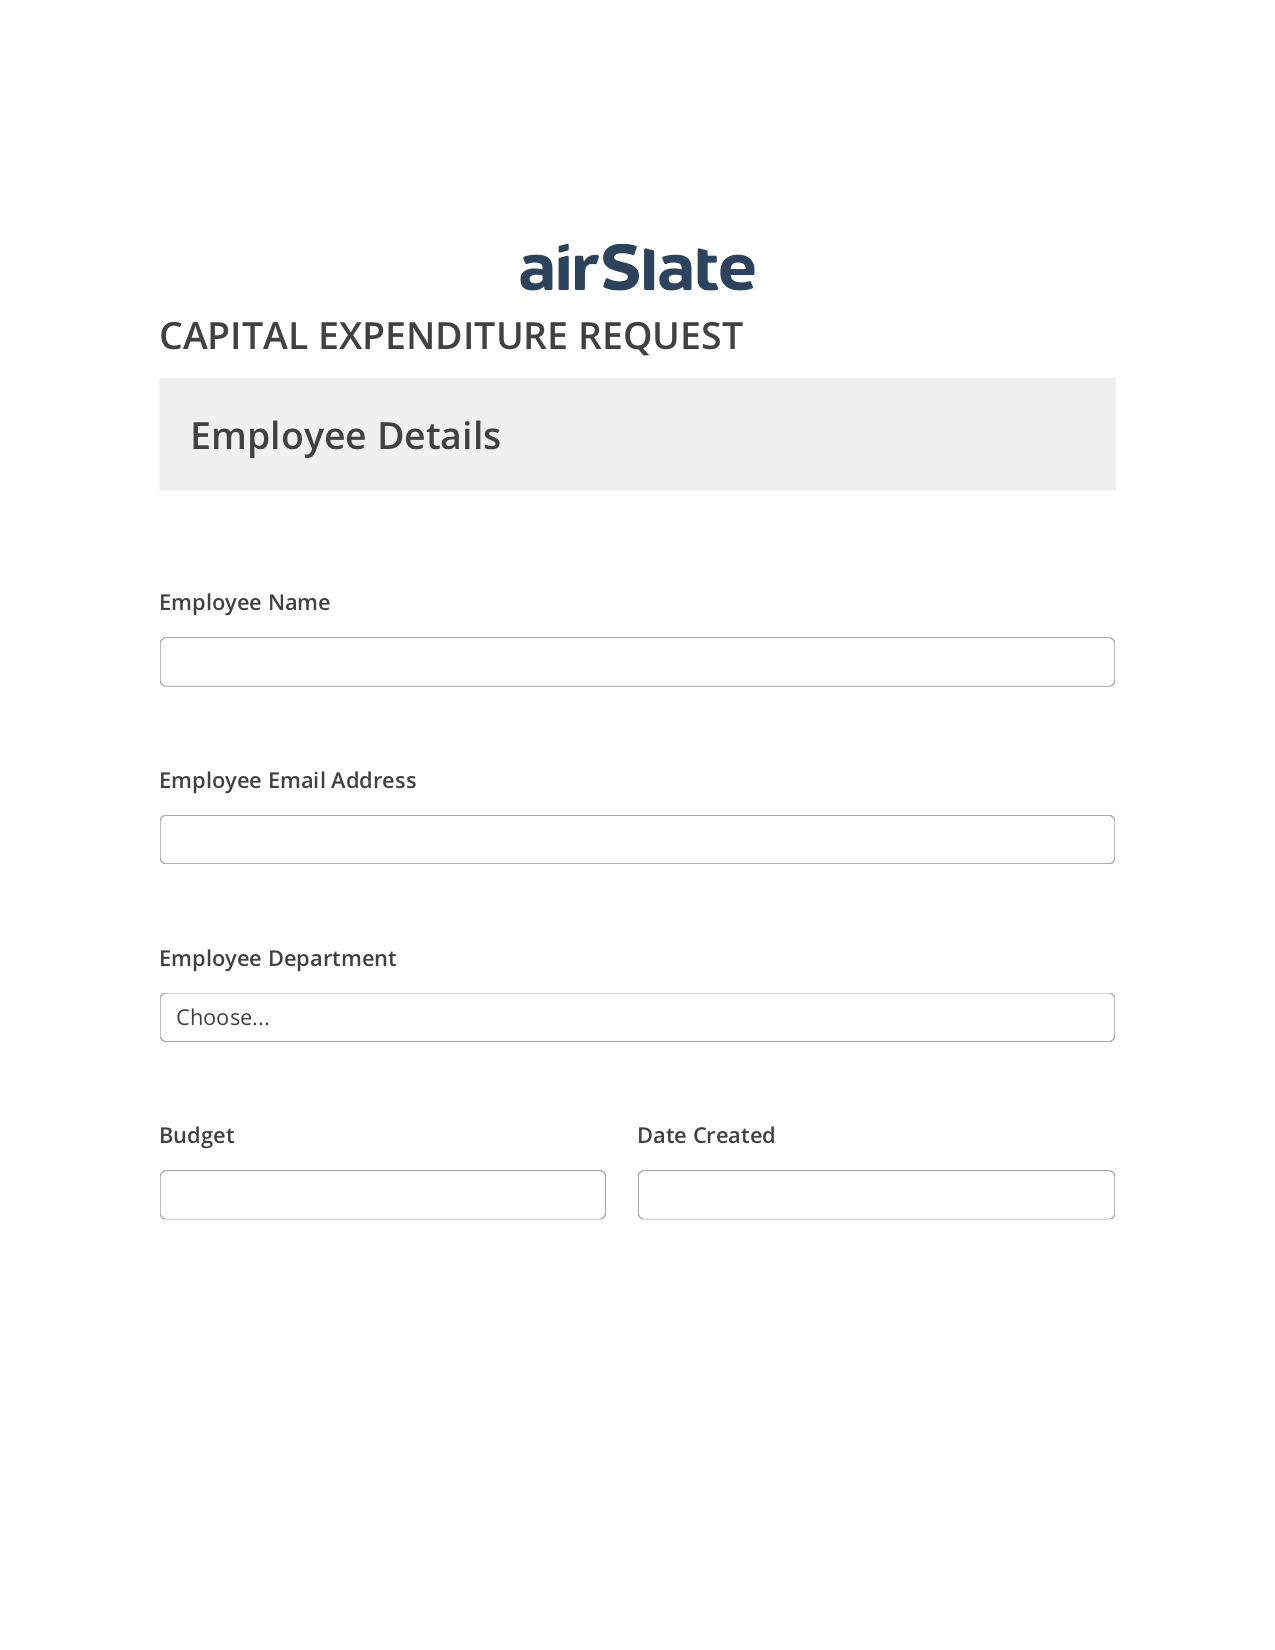 Capital Expenditure Request Approval Workflow Pre-fill from Google Sheet Dropdown Options Bot, Custom Field's Value Bot, Export to Salesforce Bot